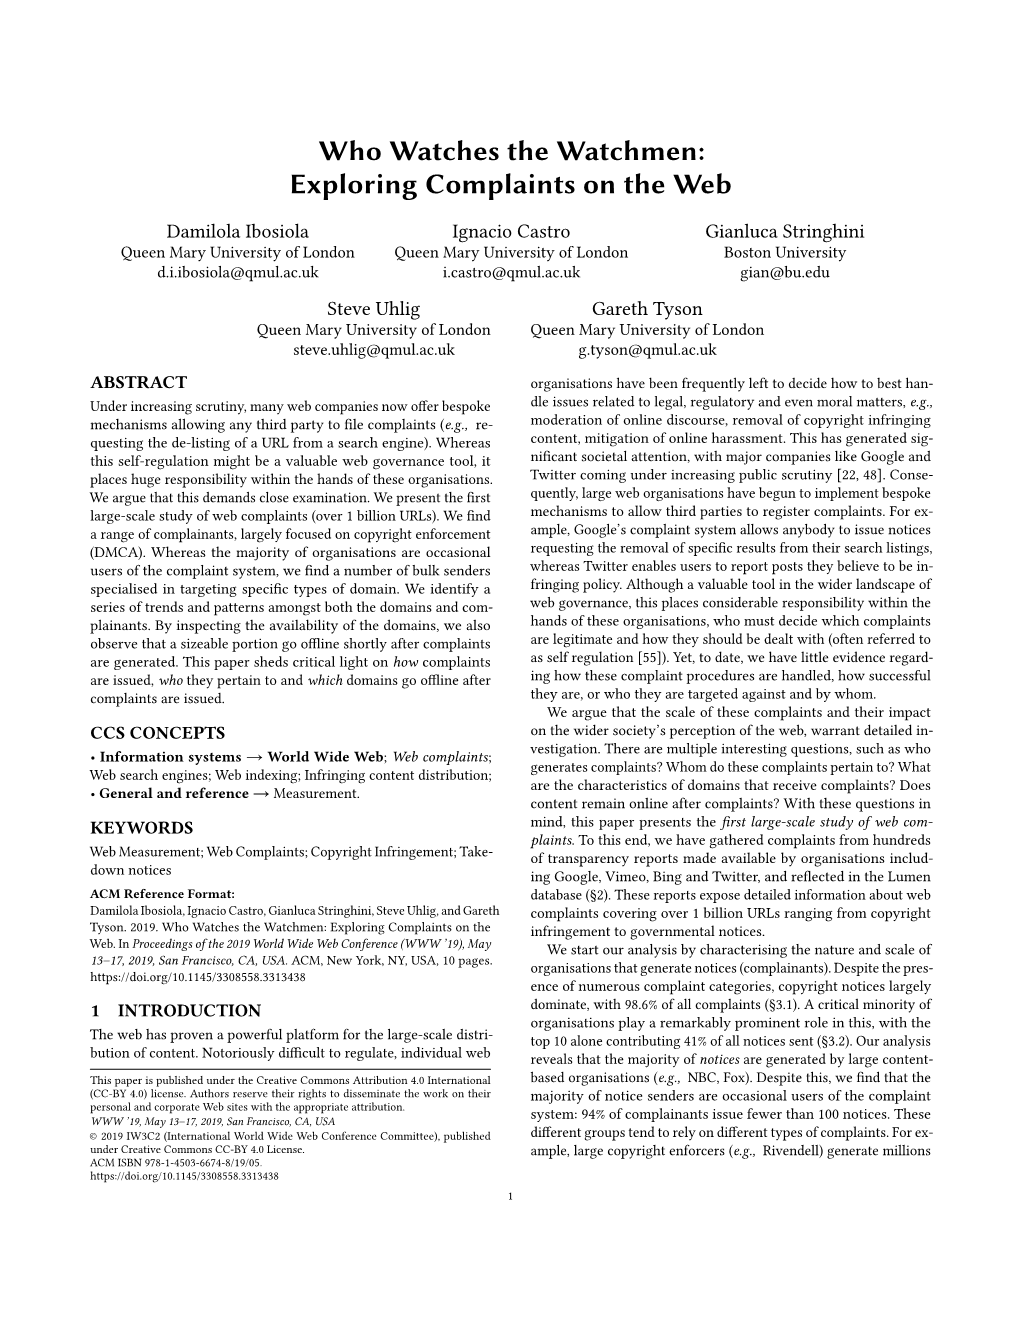 Who Watches the Watchmen: Exploring Complaints on the Web